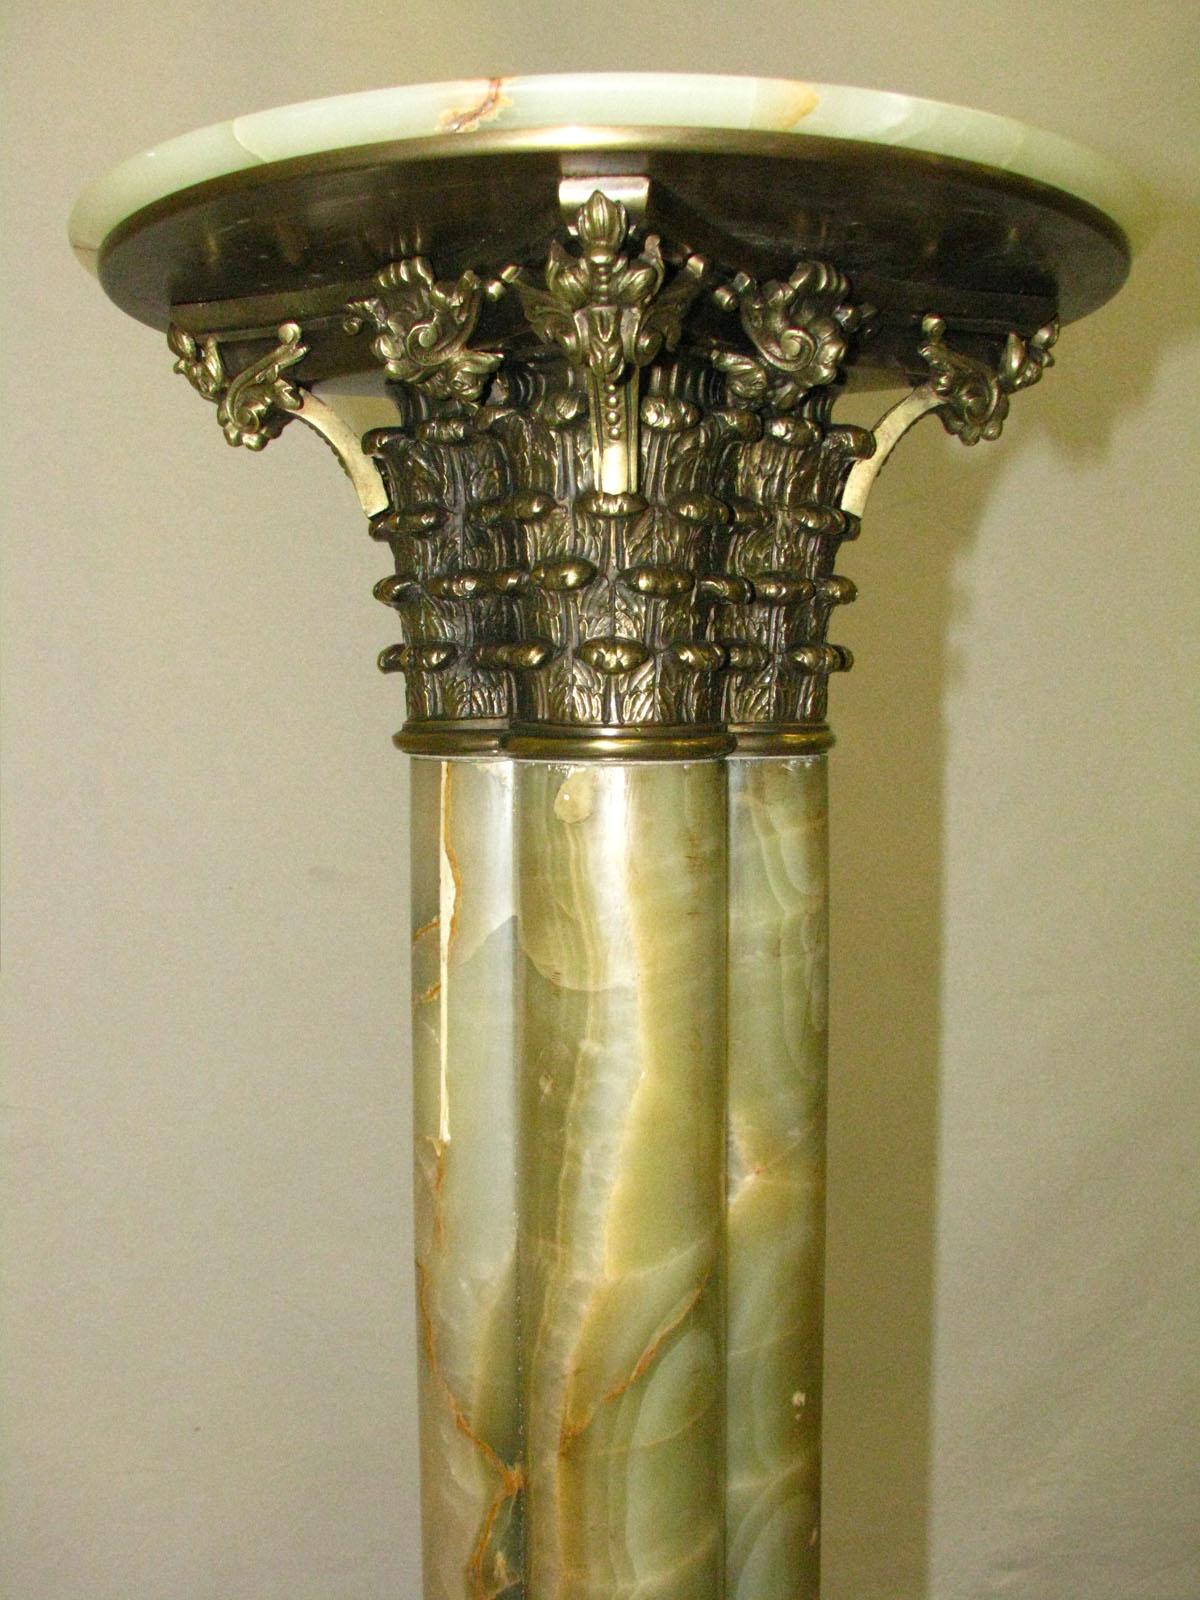 Polished Green Onyx Column / Pedestal, 20th Century For Sale 2